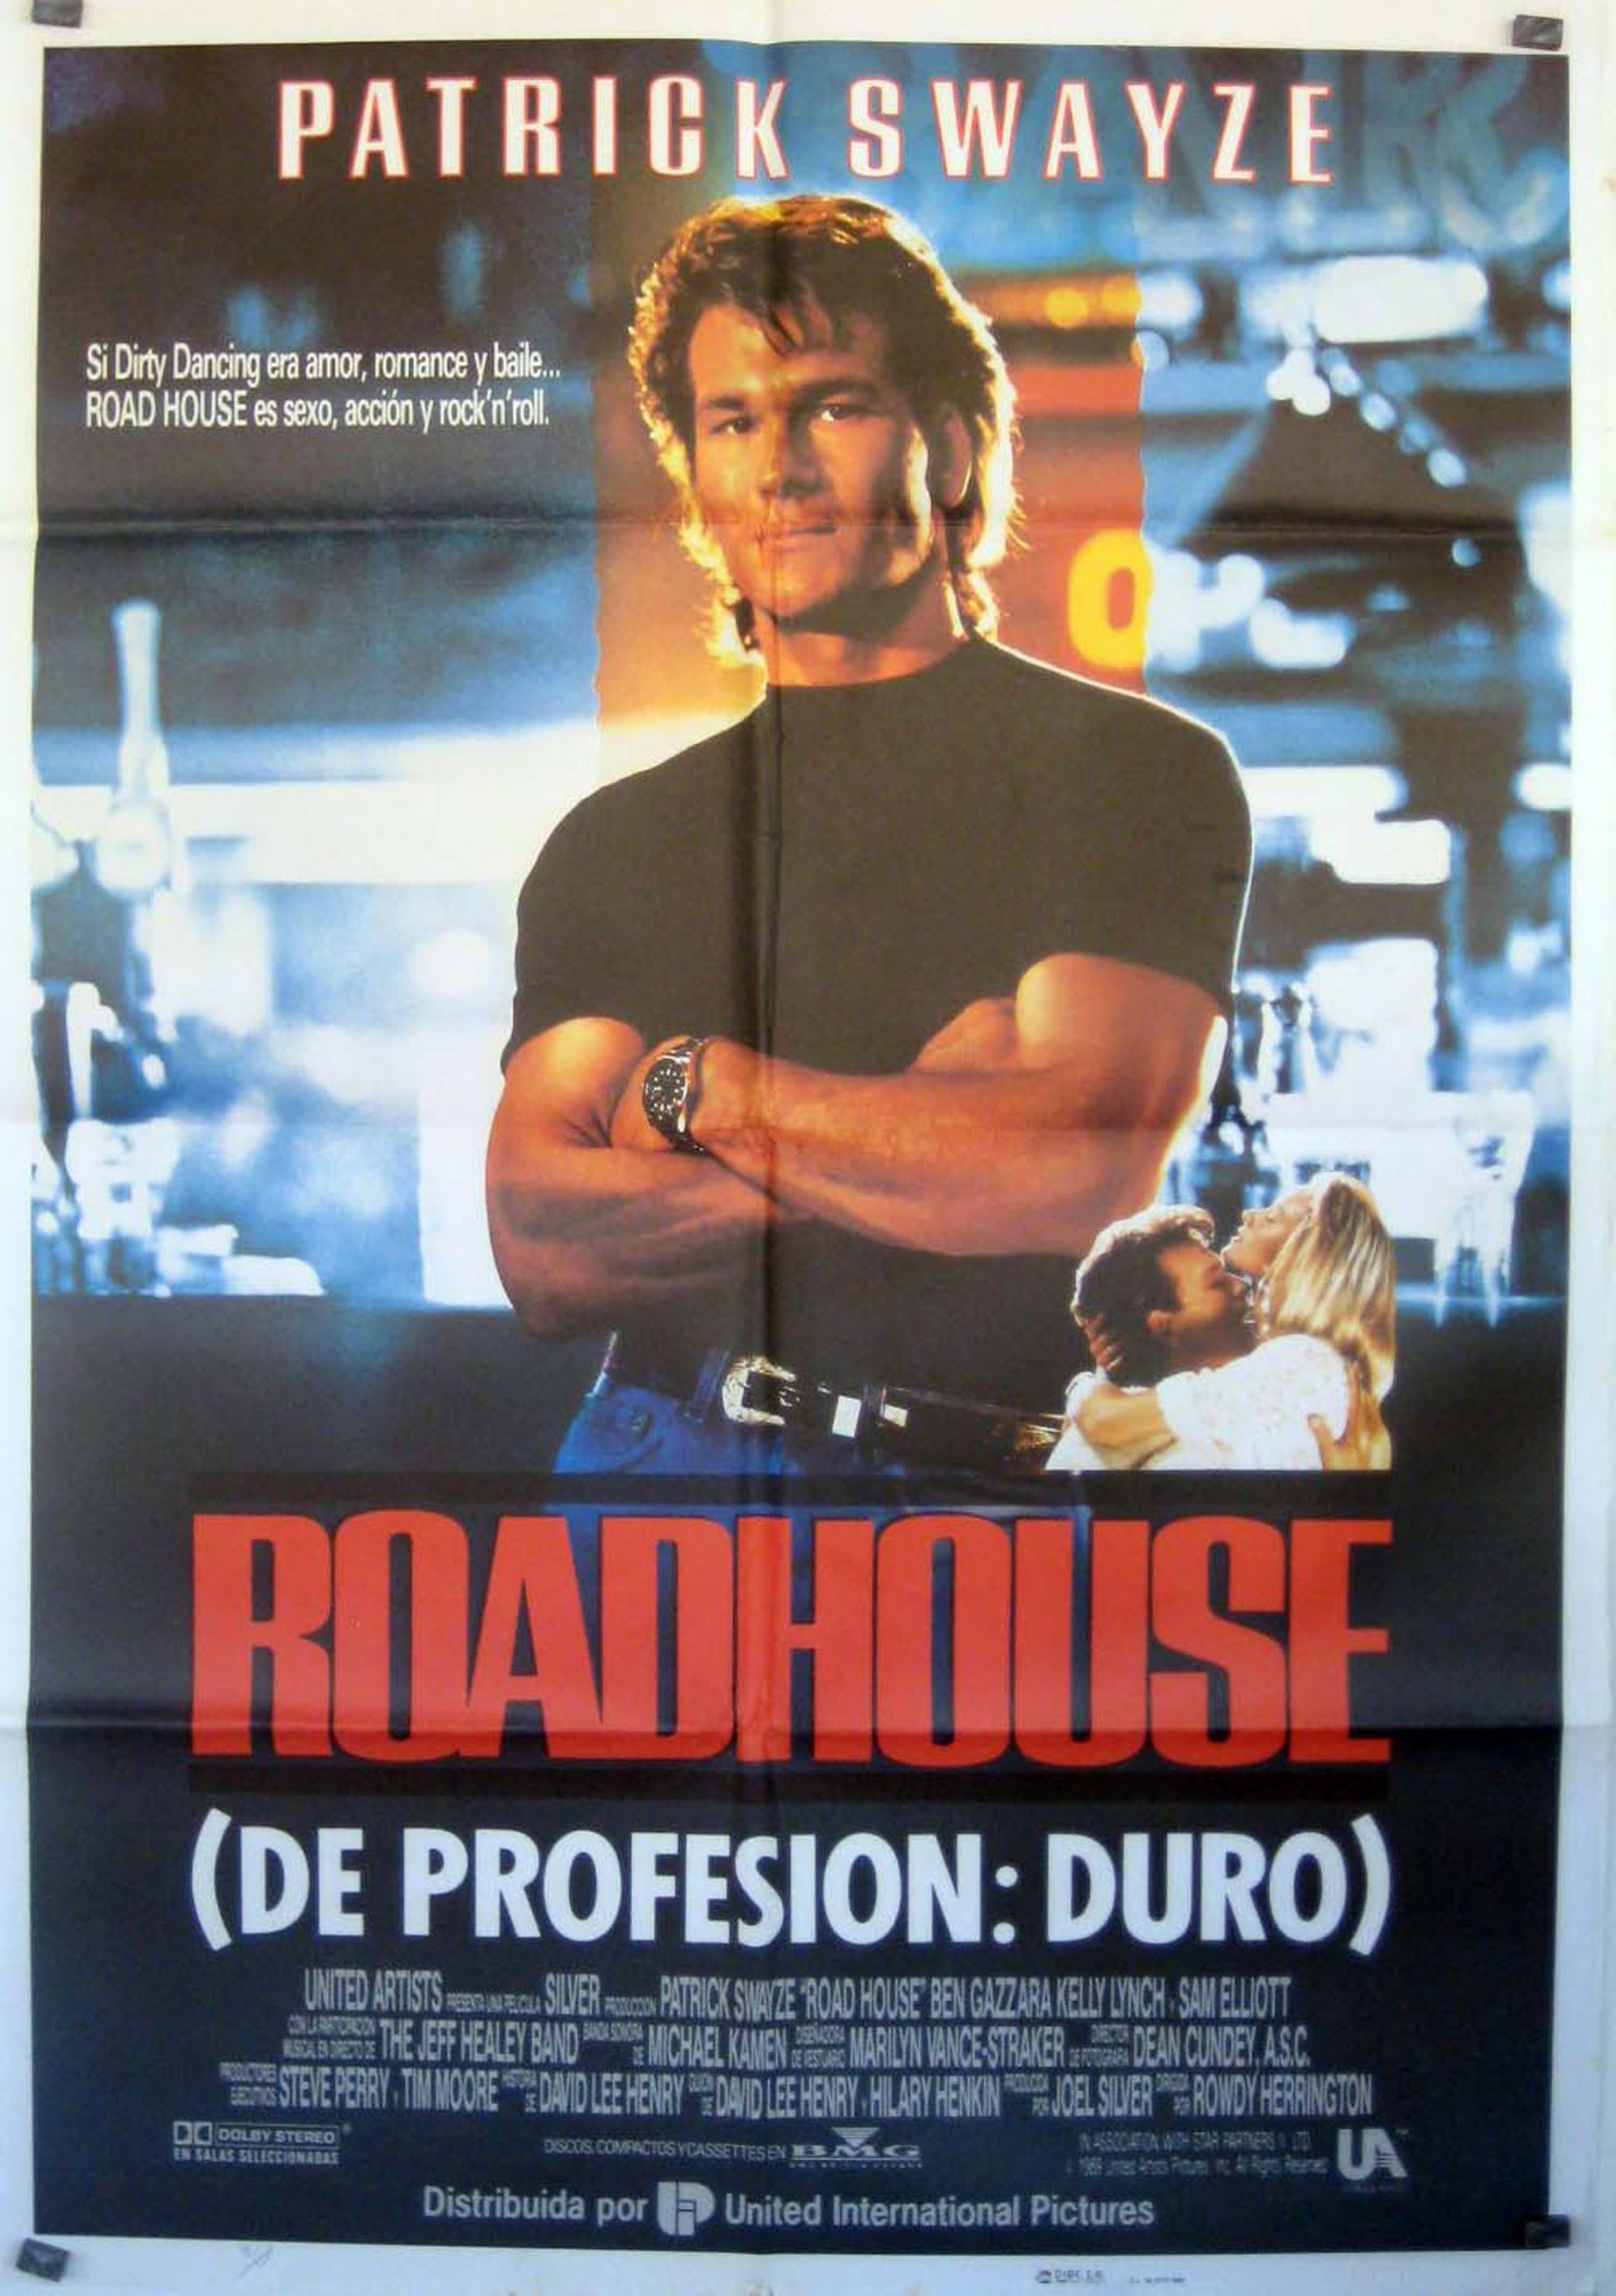 "ROADHOUSE" MOVIE POSTER "ROAD HOUSE " MOVIE POSTER